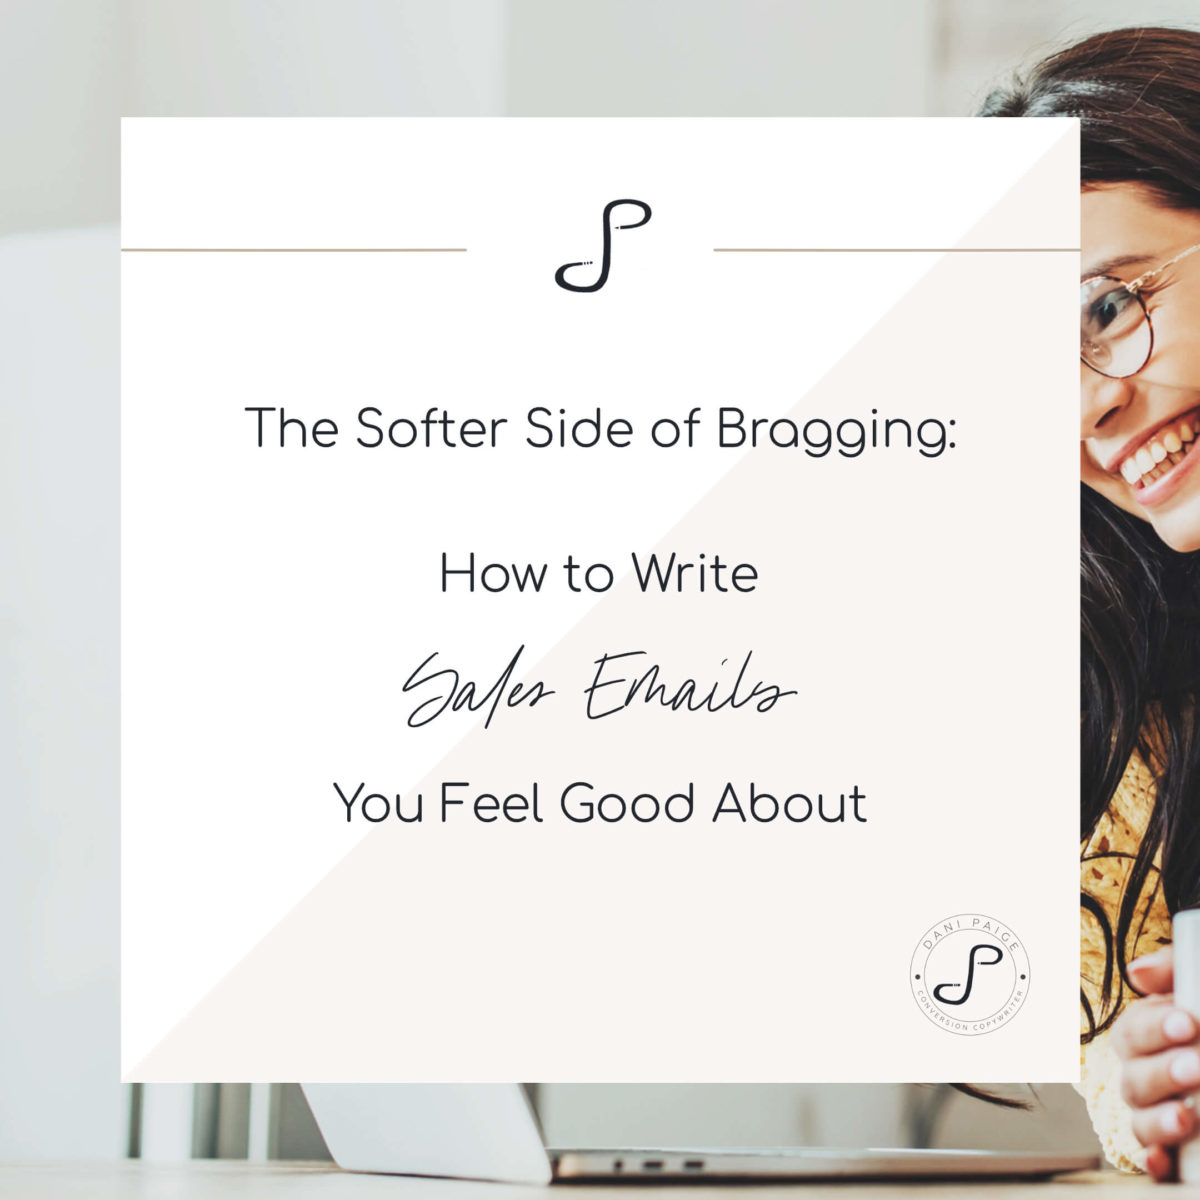 Write Sales emails you feel good about | Dani Paige Copywriter